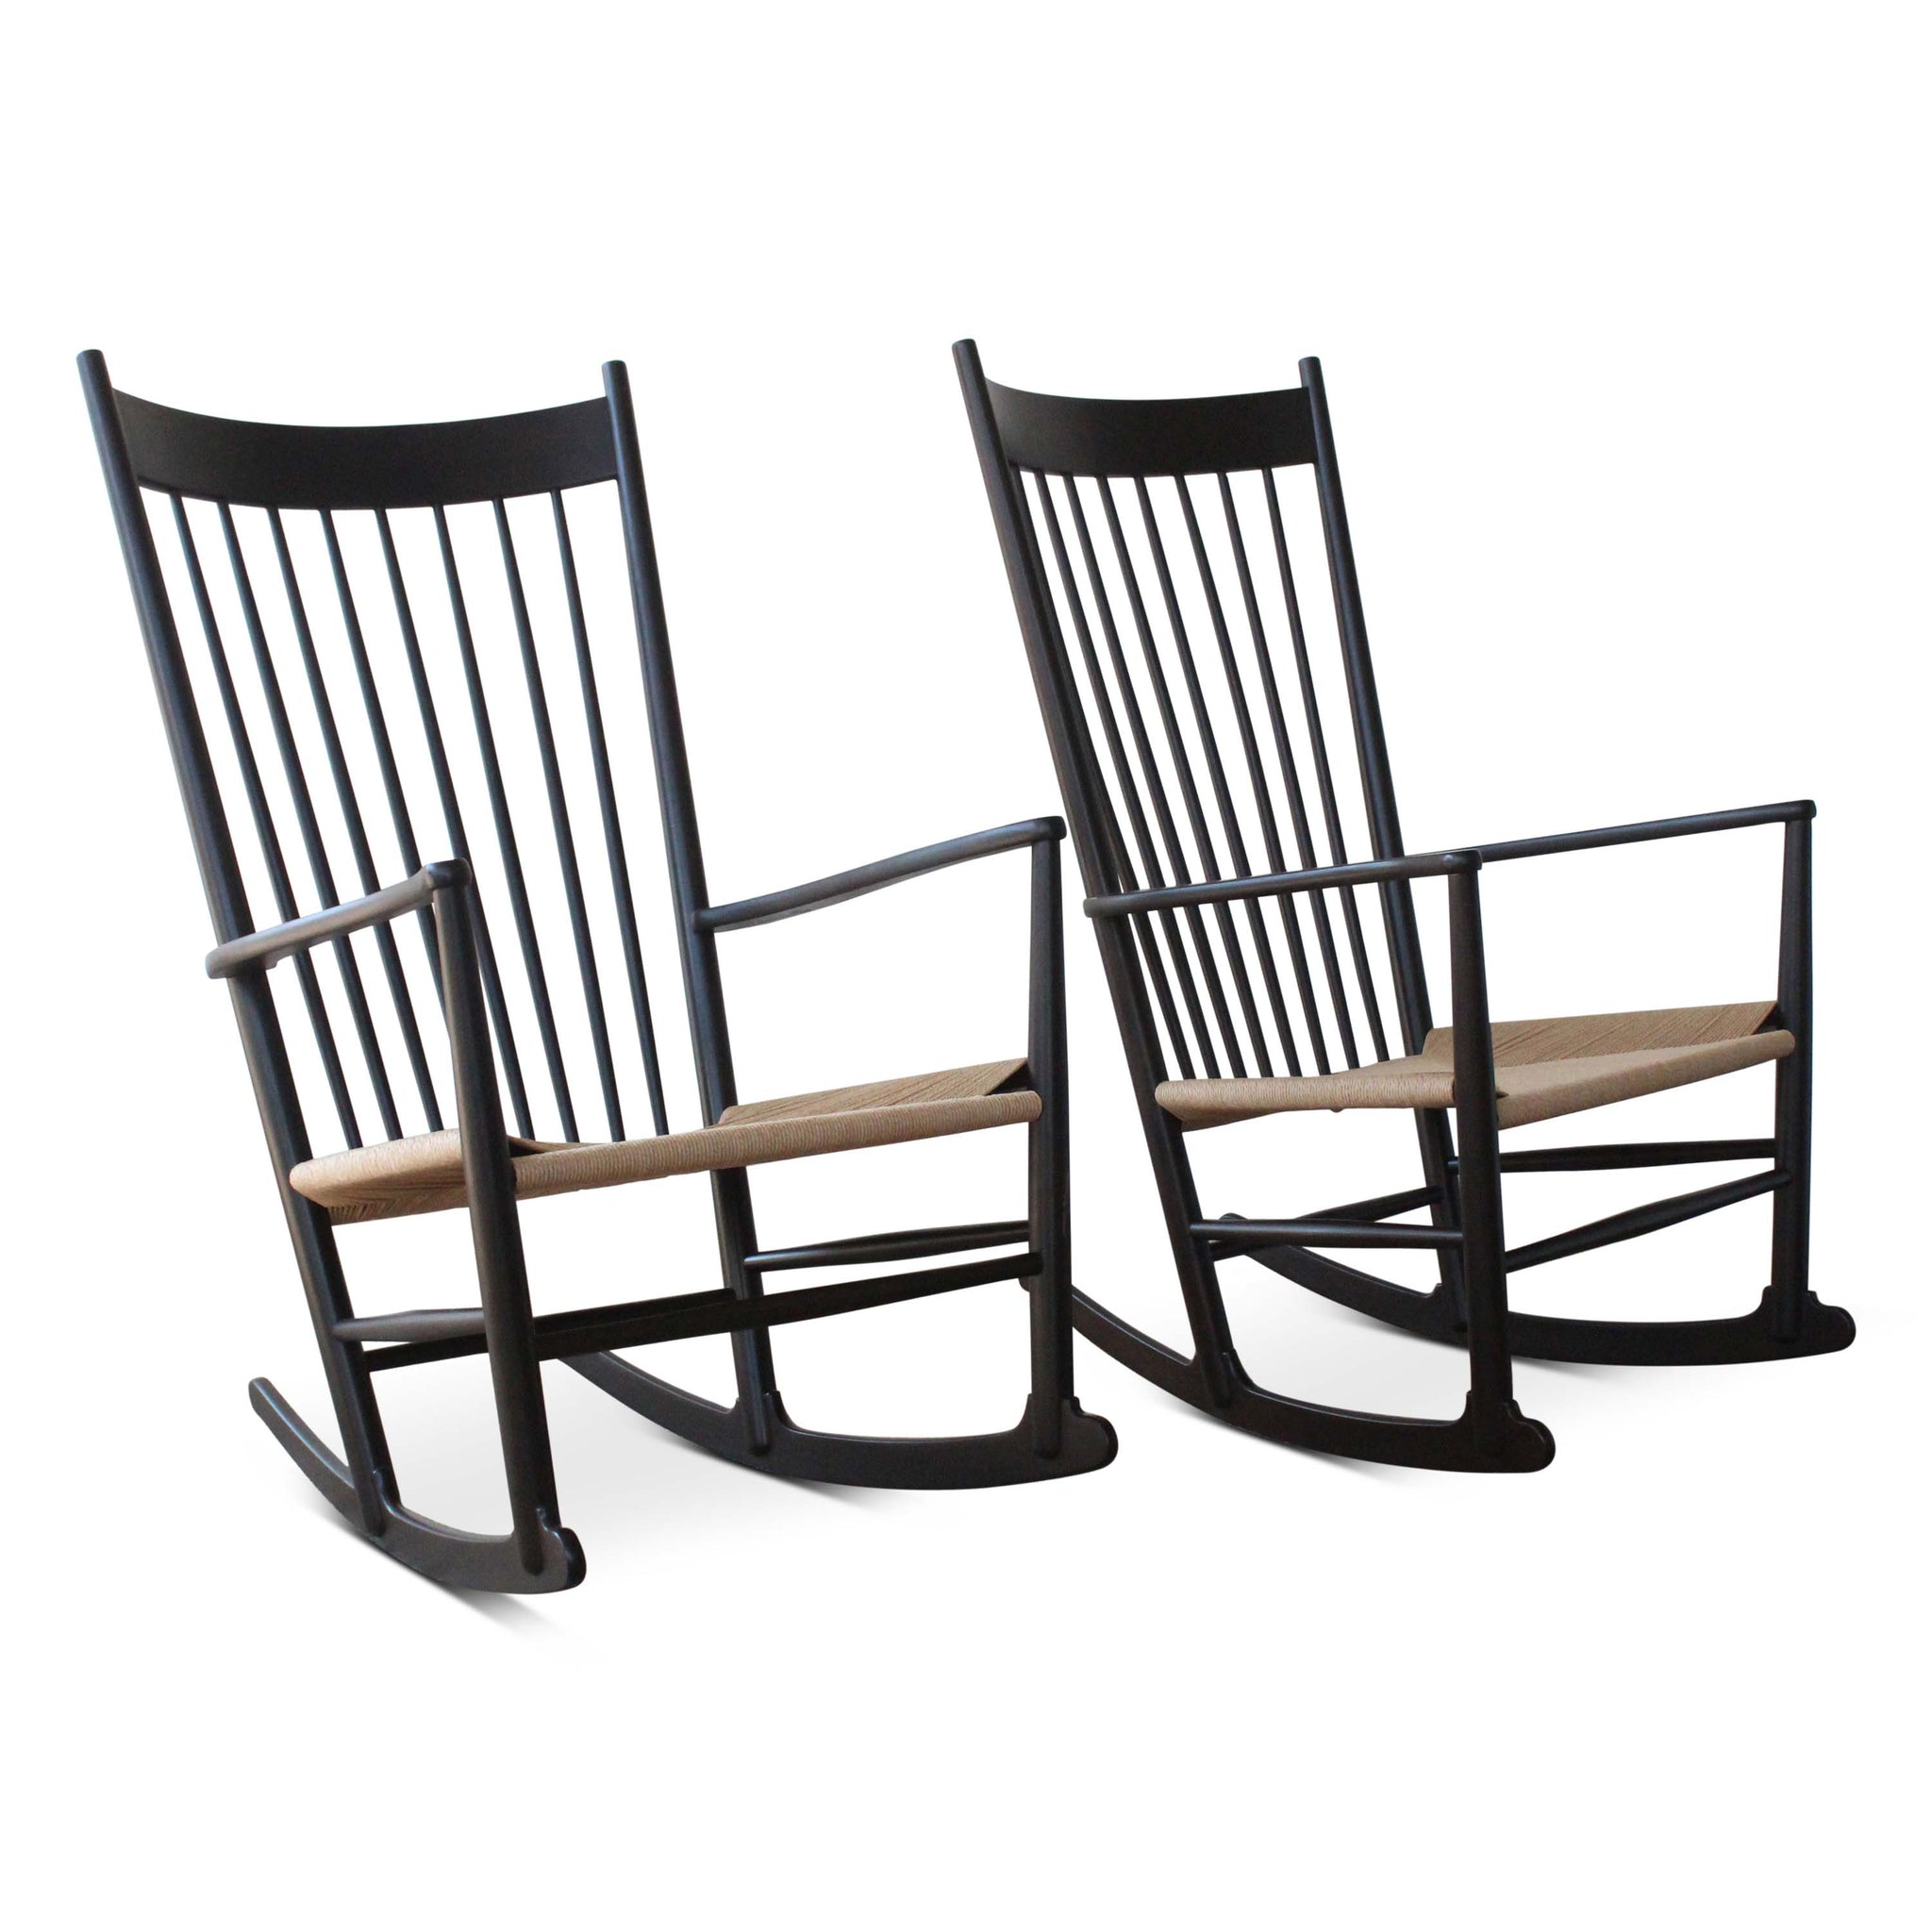 Vintage Pair of Rocking Chairs by Hans Wegner, Denmark, 1960s